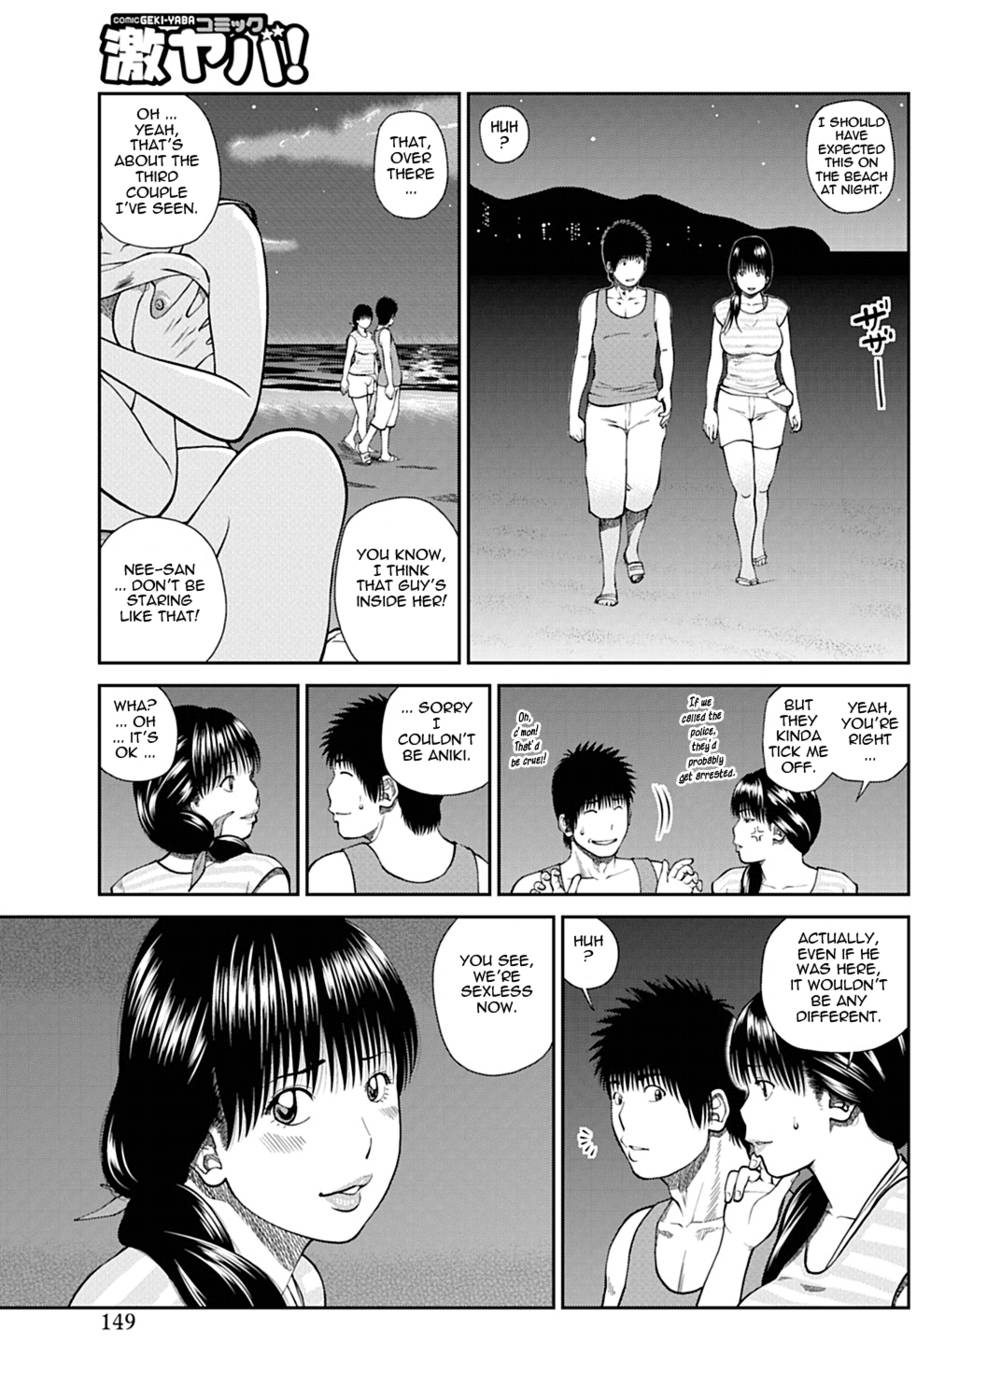 Hentai Manga Comic-34 Year Old Unsatisfied Wife-Chapter 8-With My Sister In Law At The Beach-7